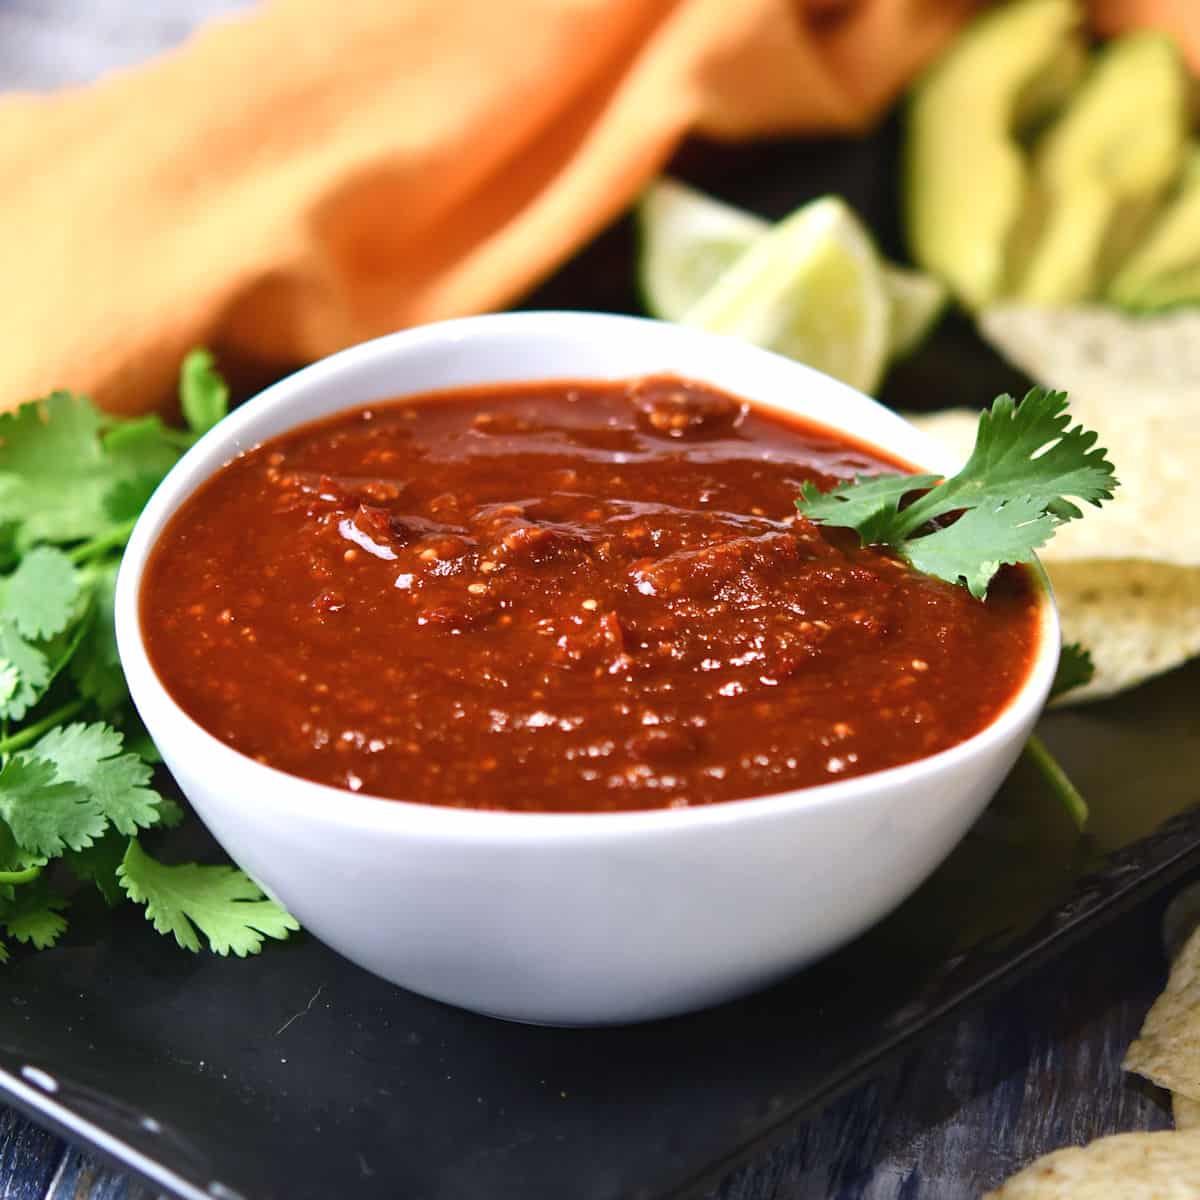 spicy tomatillo red sauce served with avocado and tortilla chips